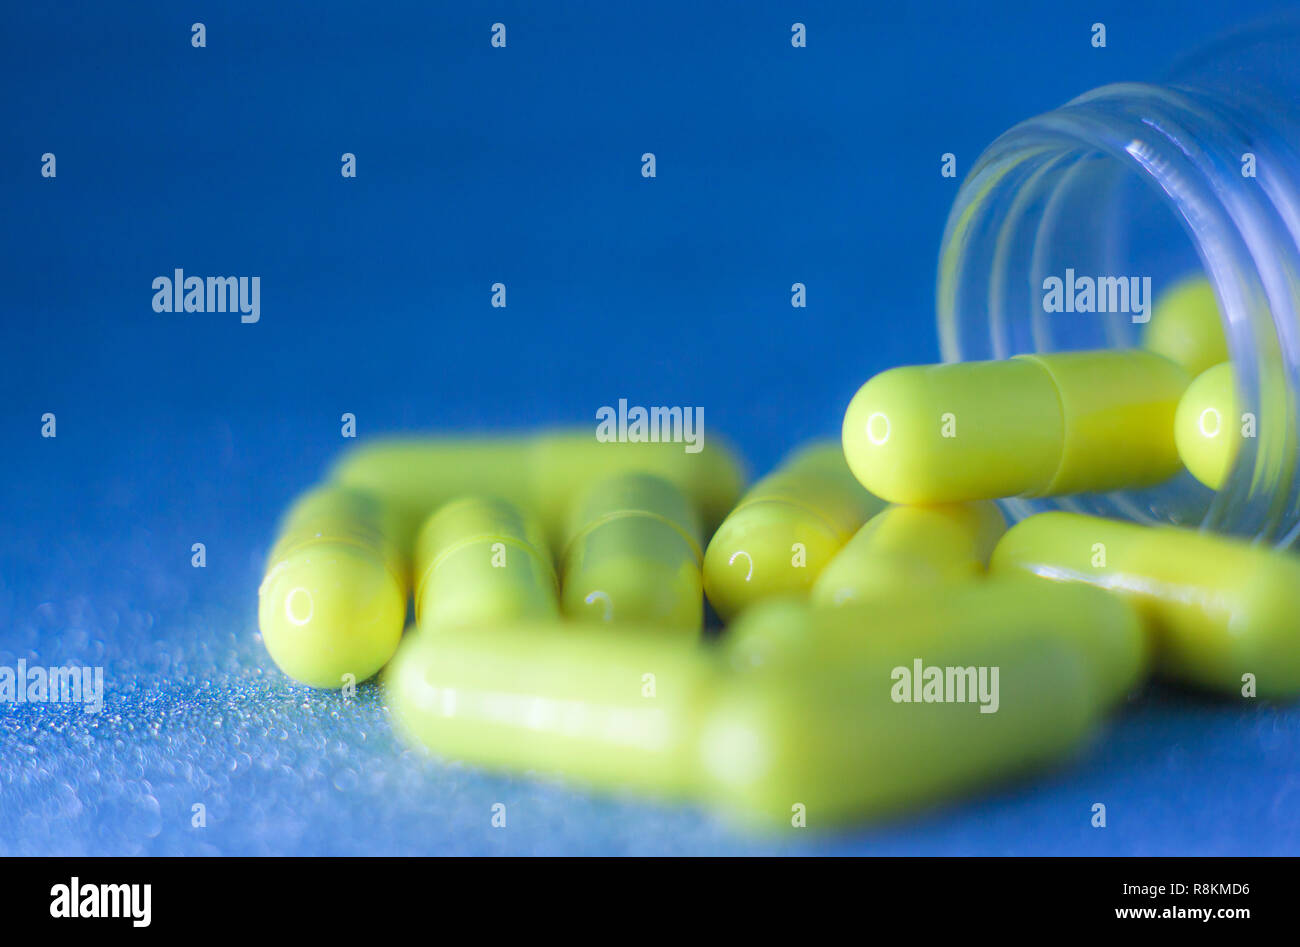 Yellow Pill Bottle High Resolution Stock Photography And Images Alamy